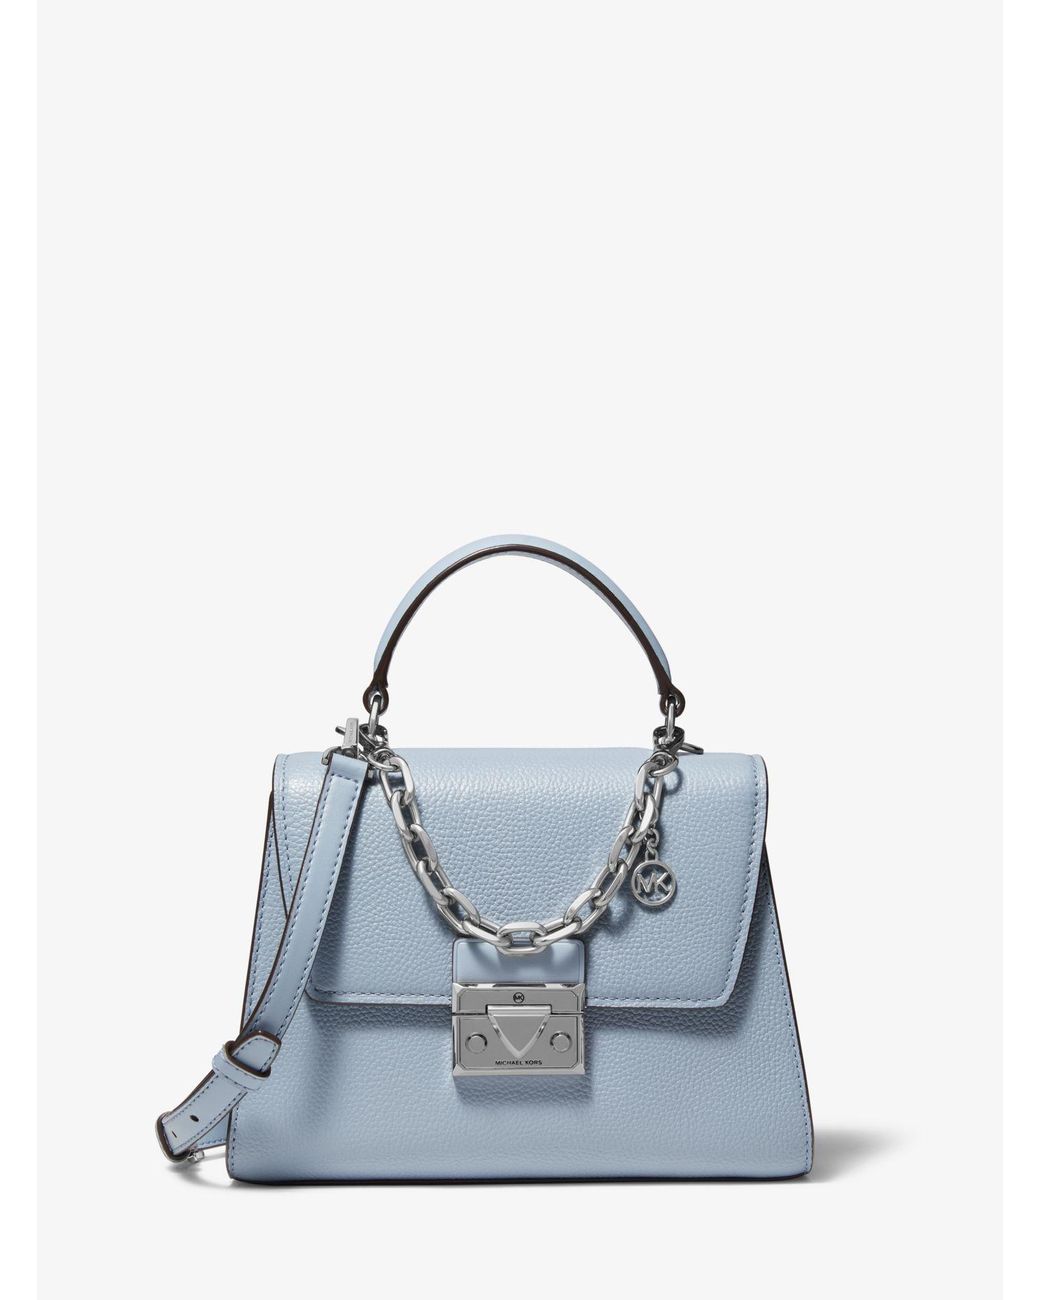 Michael Kors Serena Small Pebbled Leather Satchel in Blue | Lyst